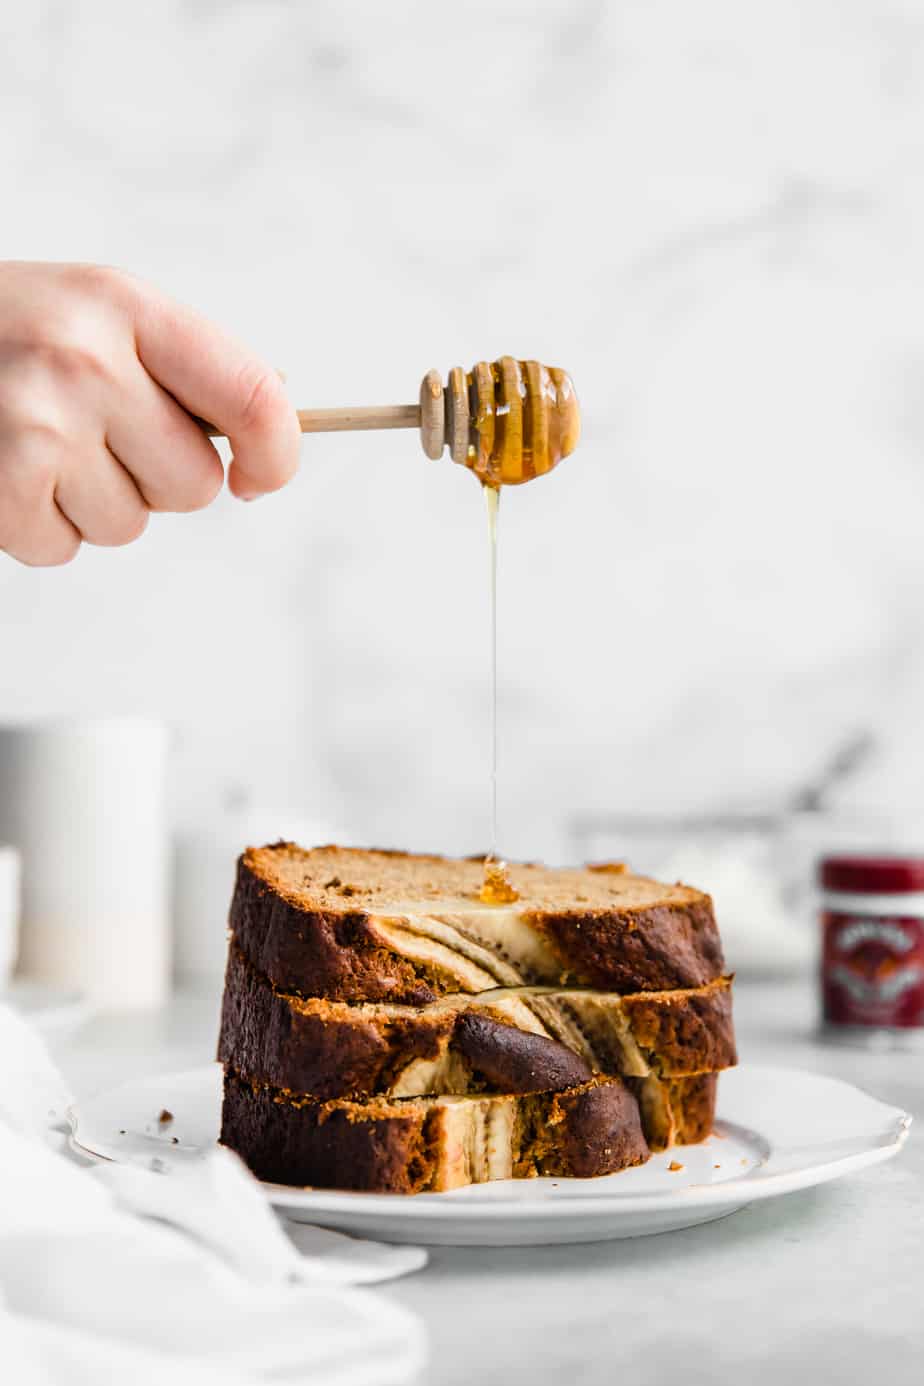 Honey drizzling over slices of banana bread